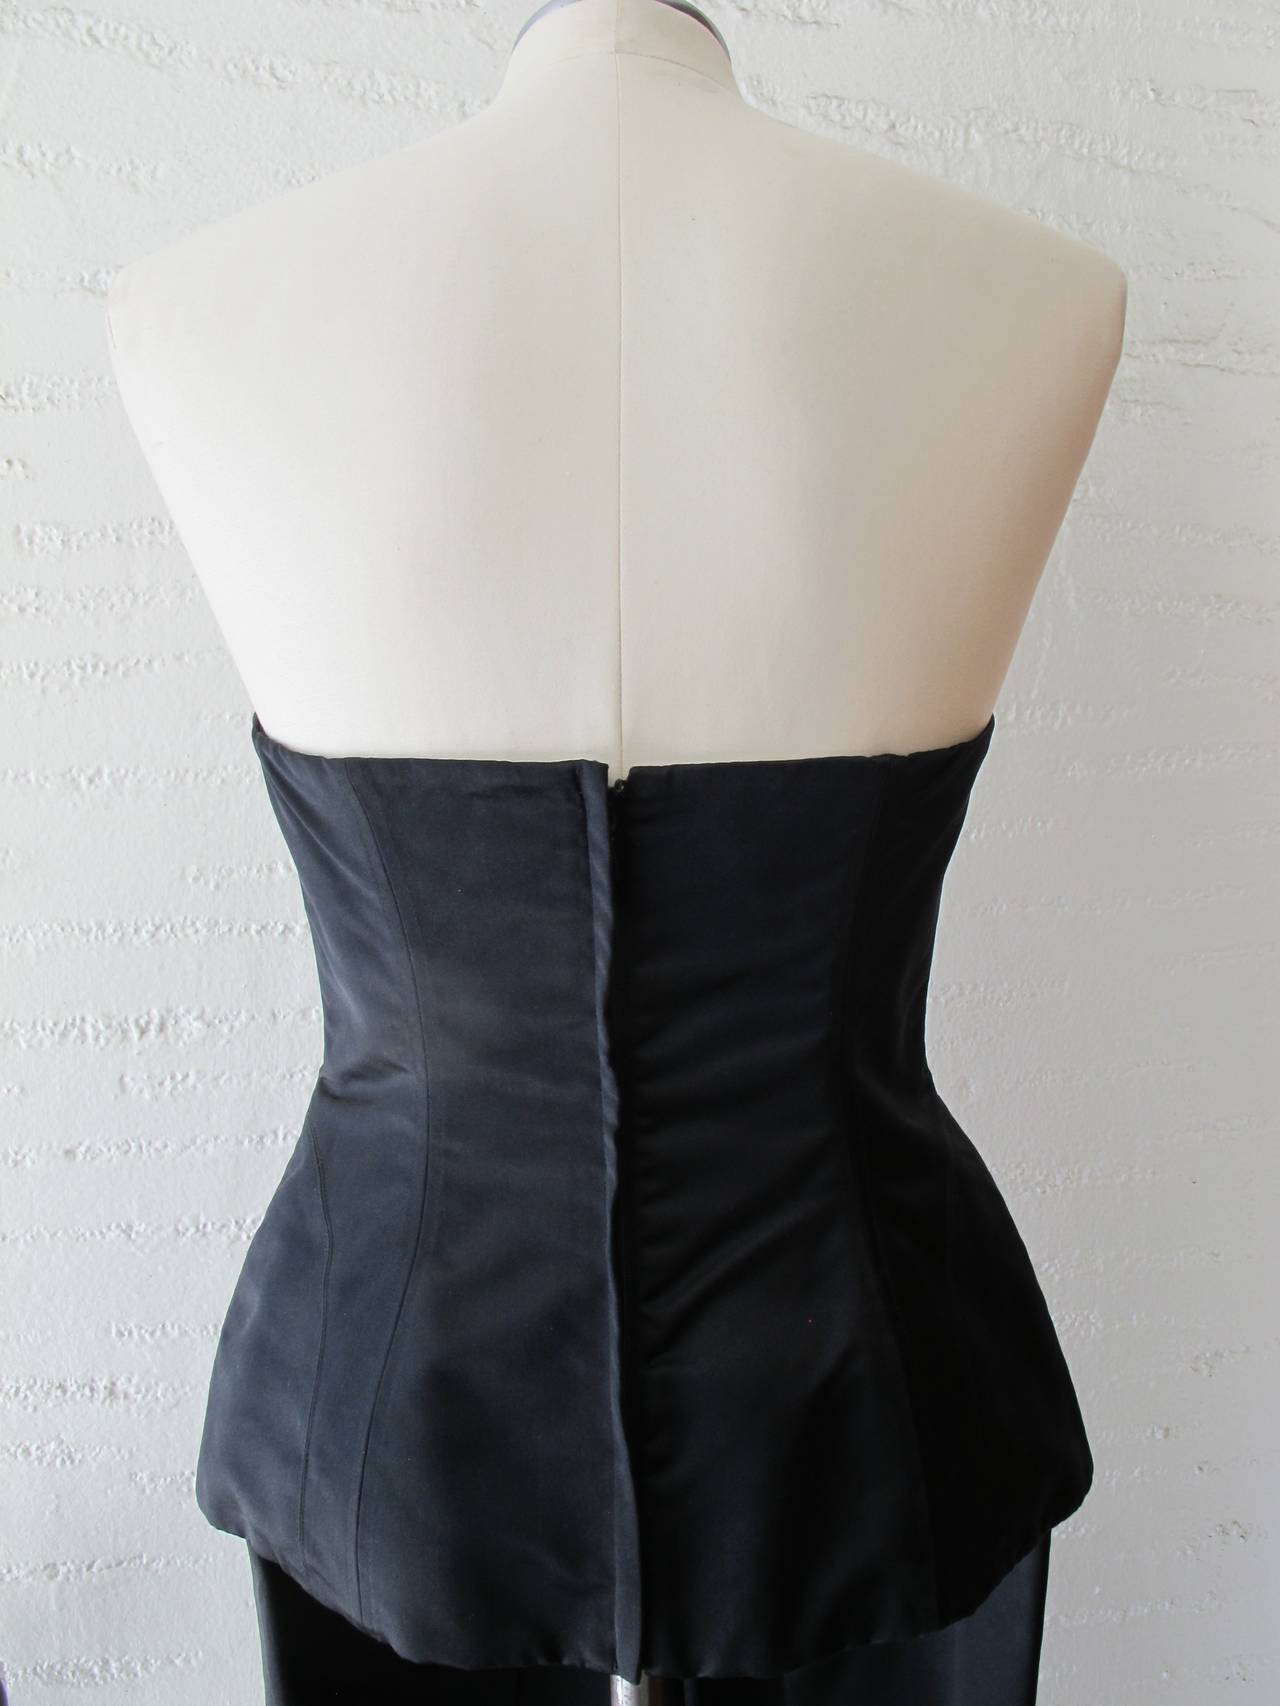 Tom Ford for Gucci Black Bustier and Matching Slacks In New Condition For Sale In San Francisco, CA